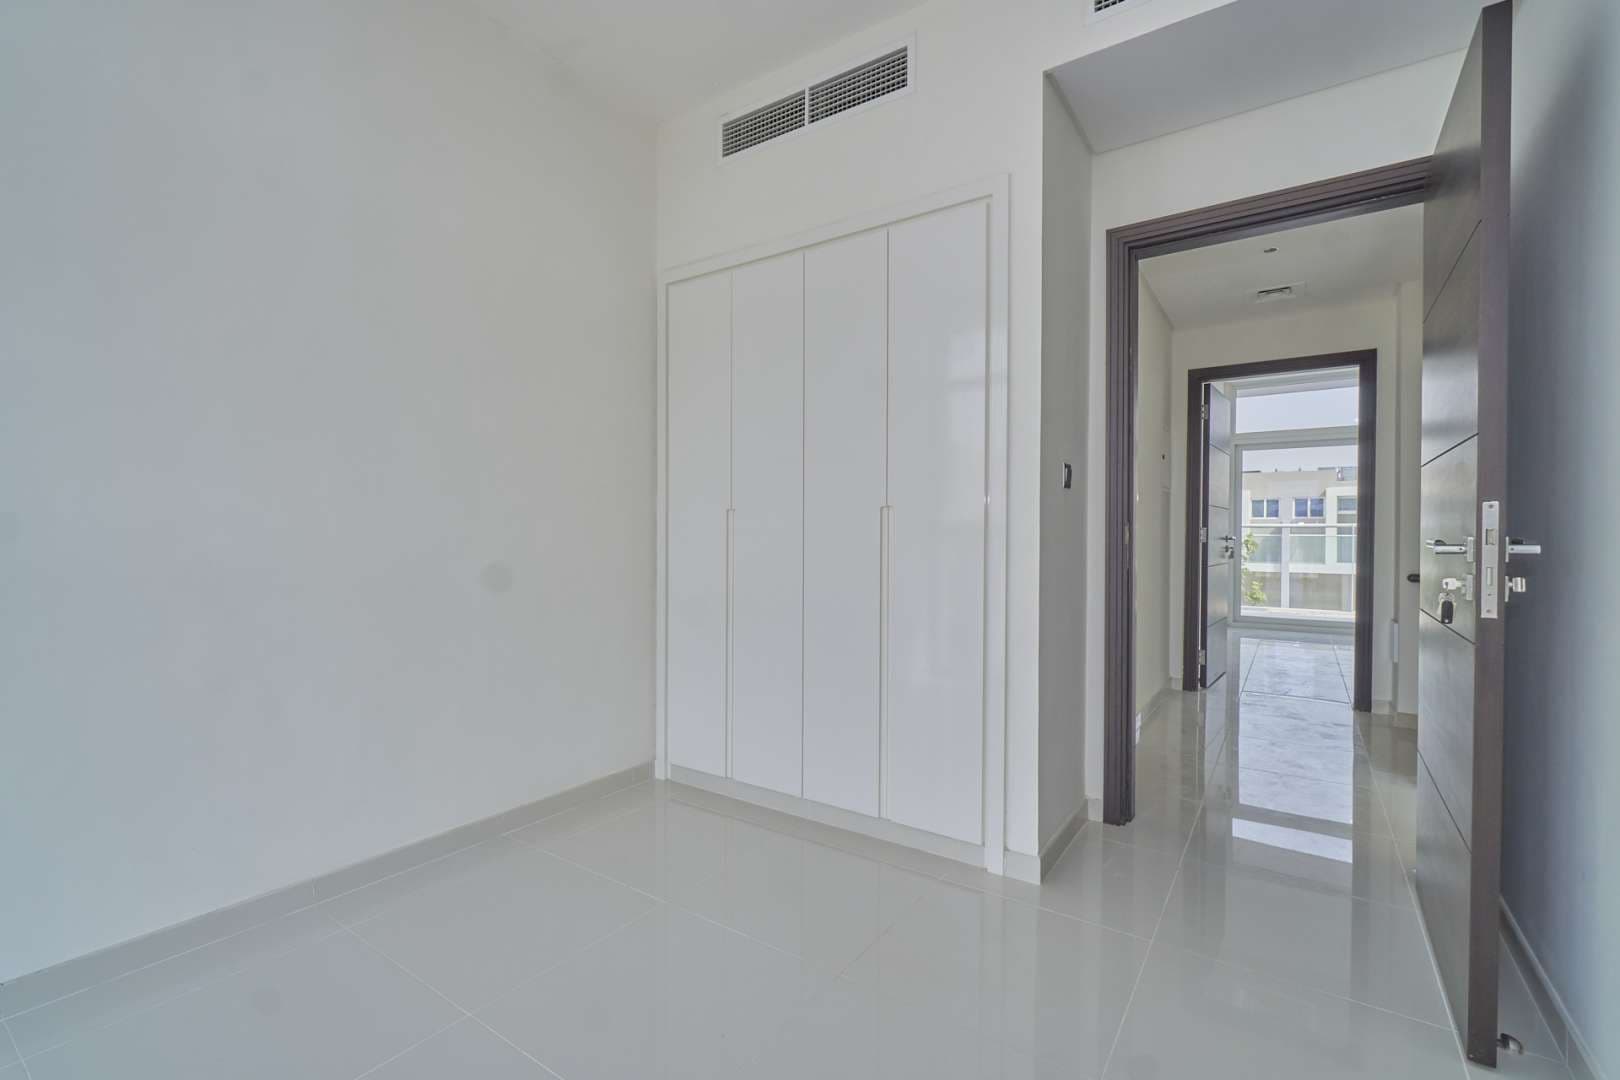 3 Bedroom Townhouse For Rent Mimosa Lp07923 2a1d3b3ed3750800.jpg